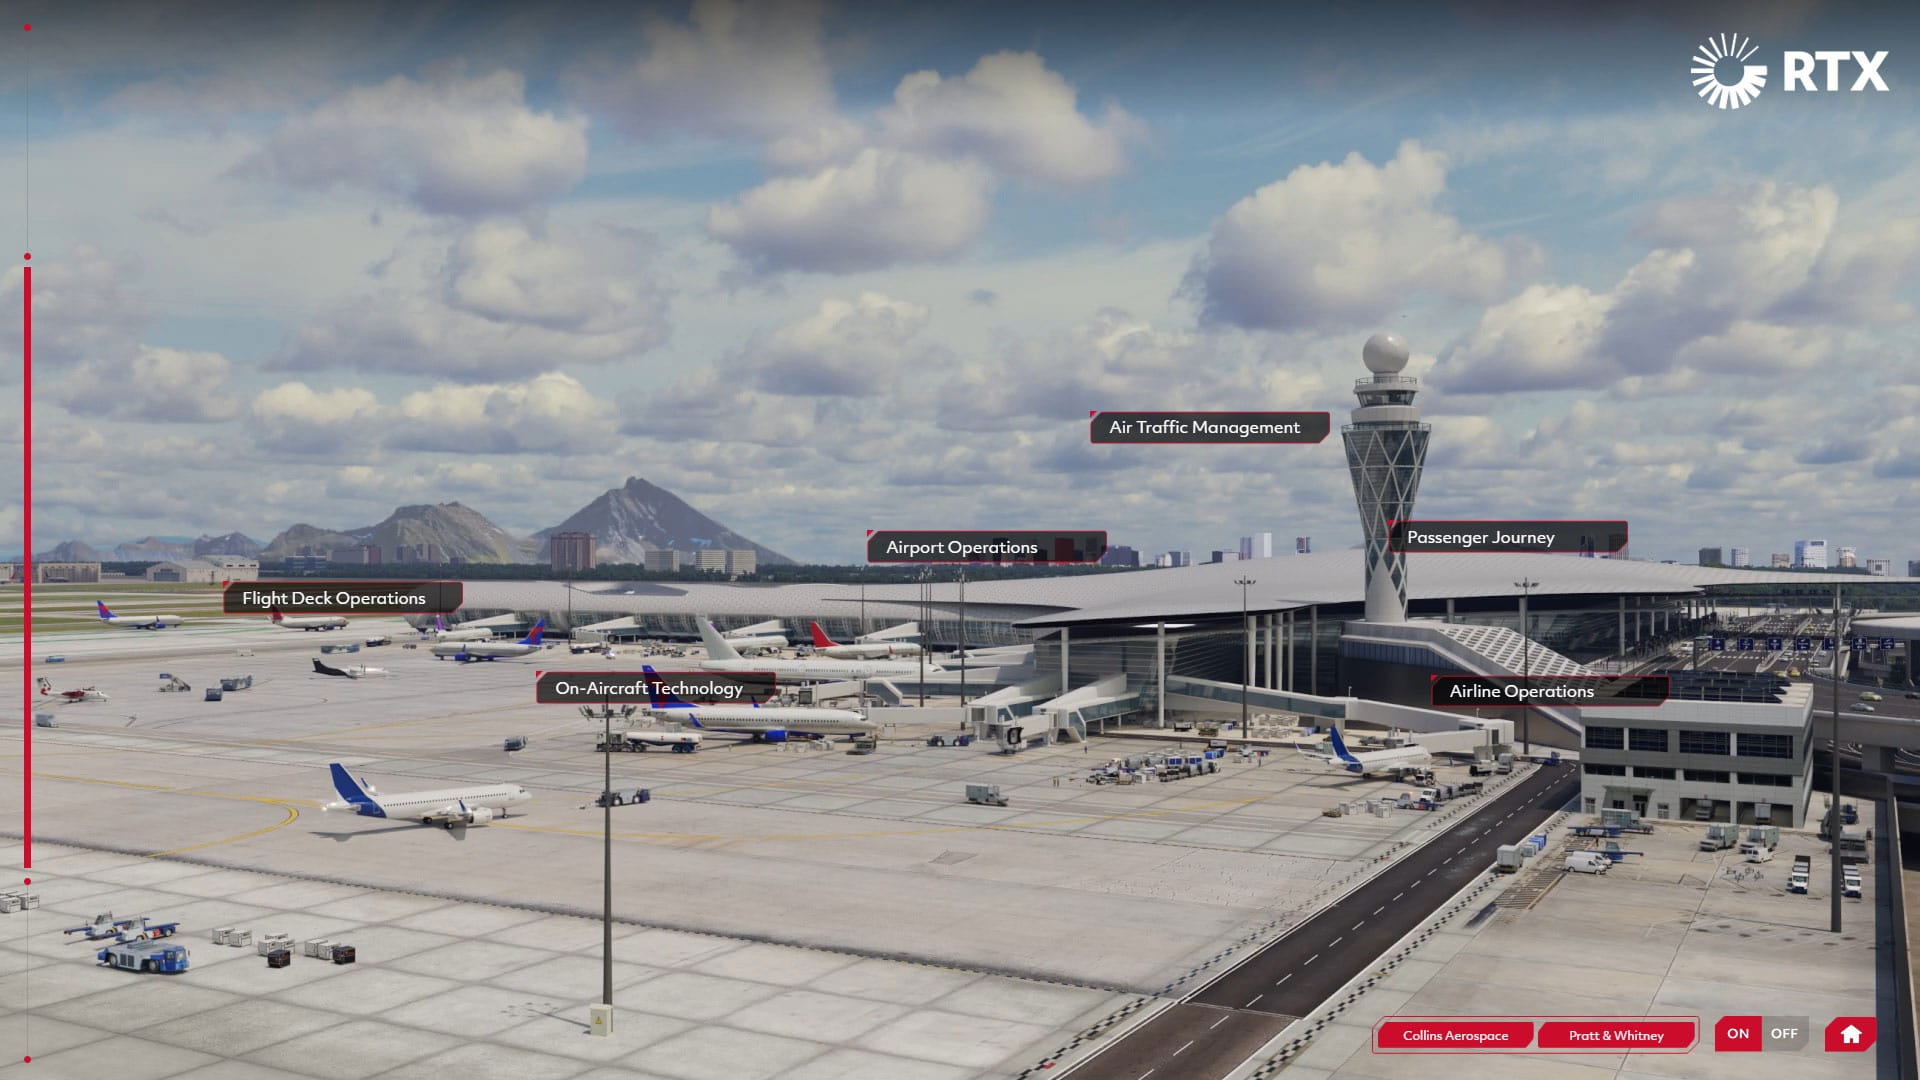 Computer rendering of an airport with planes at jet bridges